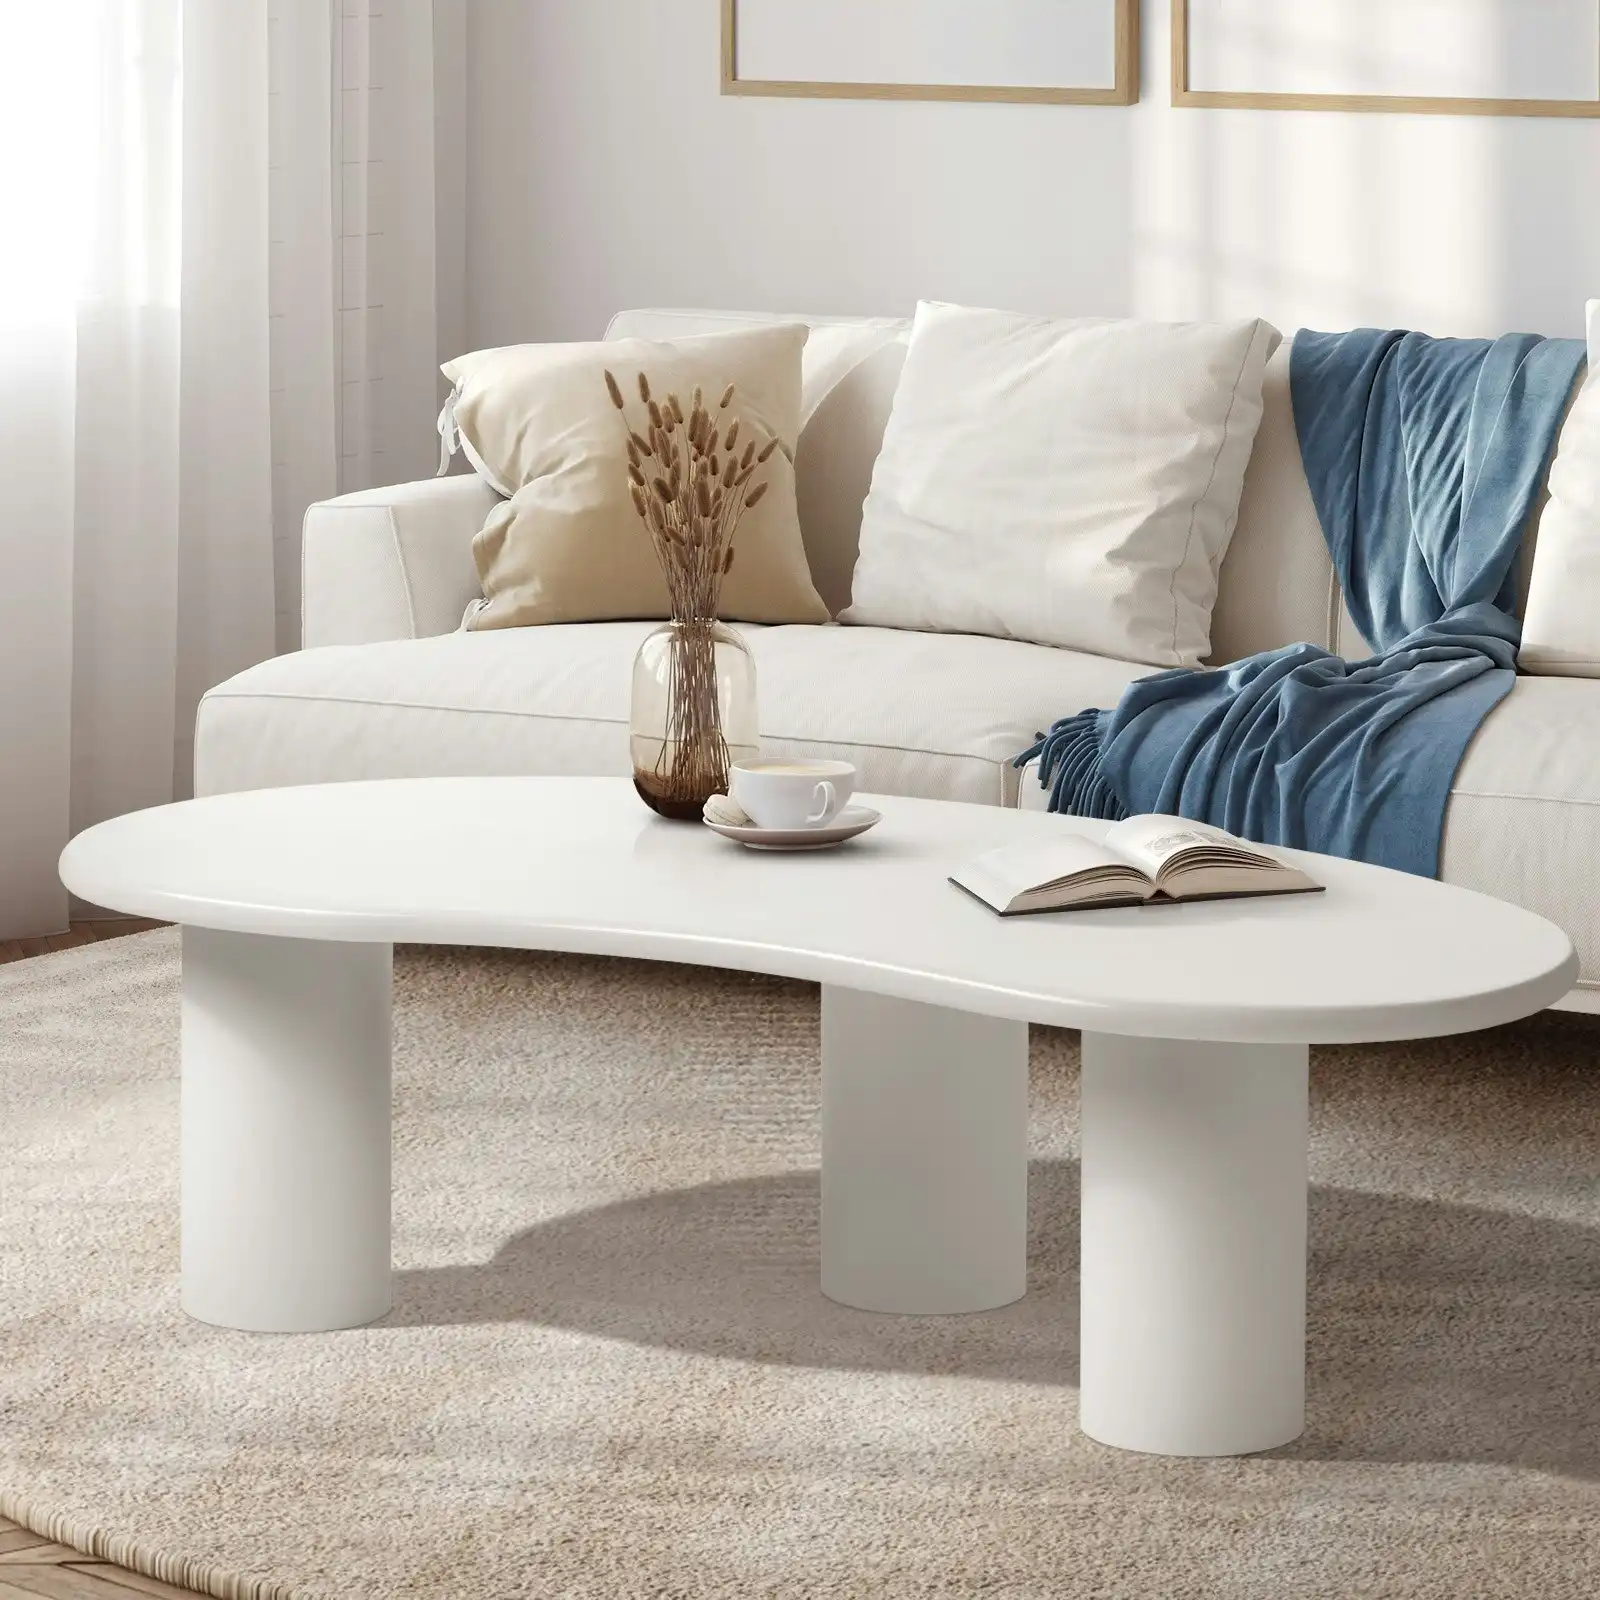 Oikiture Coffee Table Sofa Cafe Desk Side Tables Living Room Irregular White